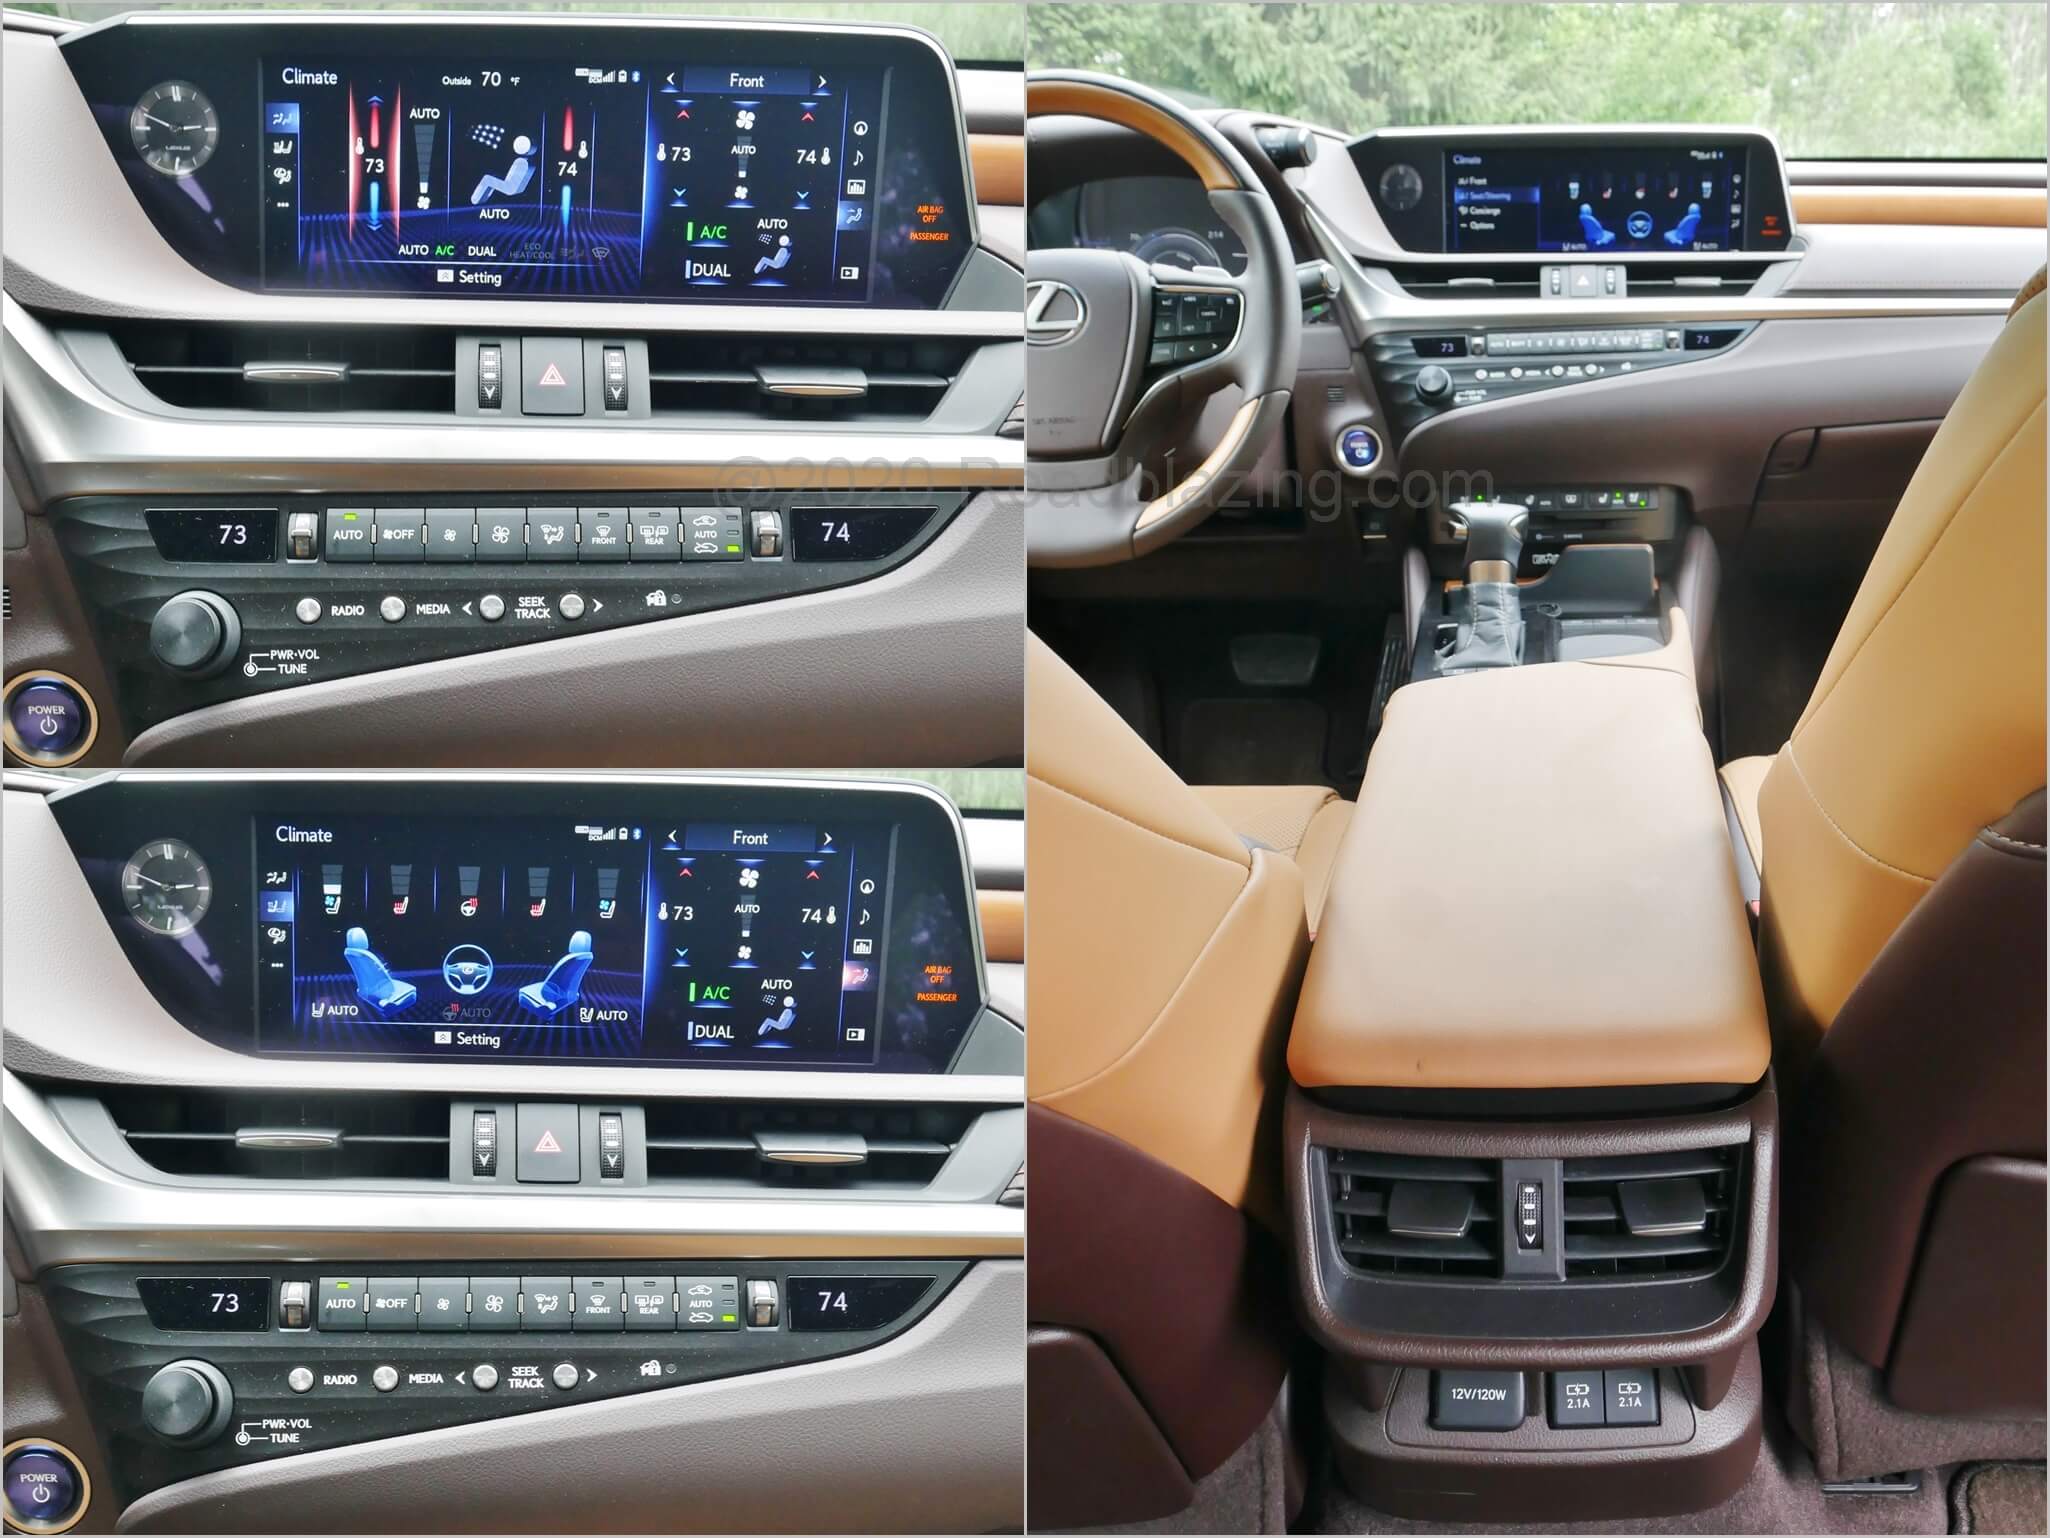 2020 Lexus ES 300h: 2-zone automated climate control, concierge front seat and steering wheel temperature control, rear seat ventilation, seat heating and USB x 2 power supply